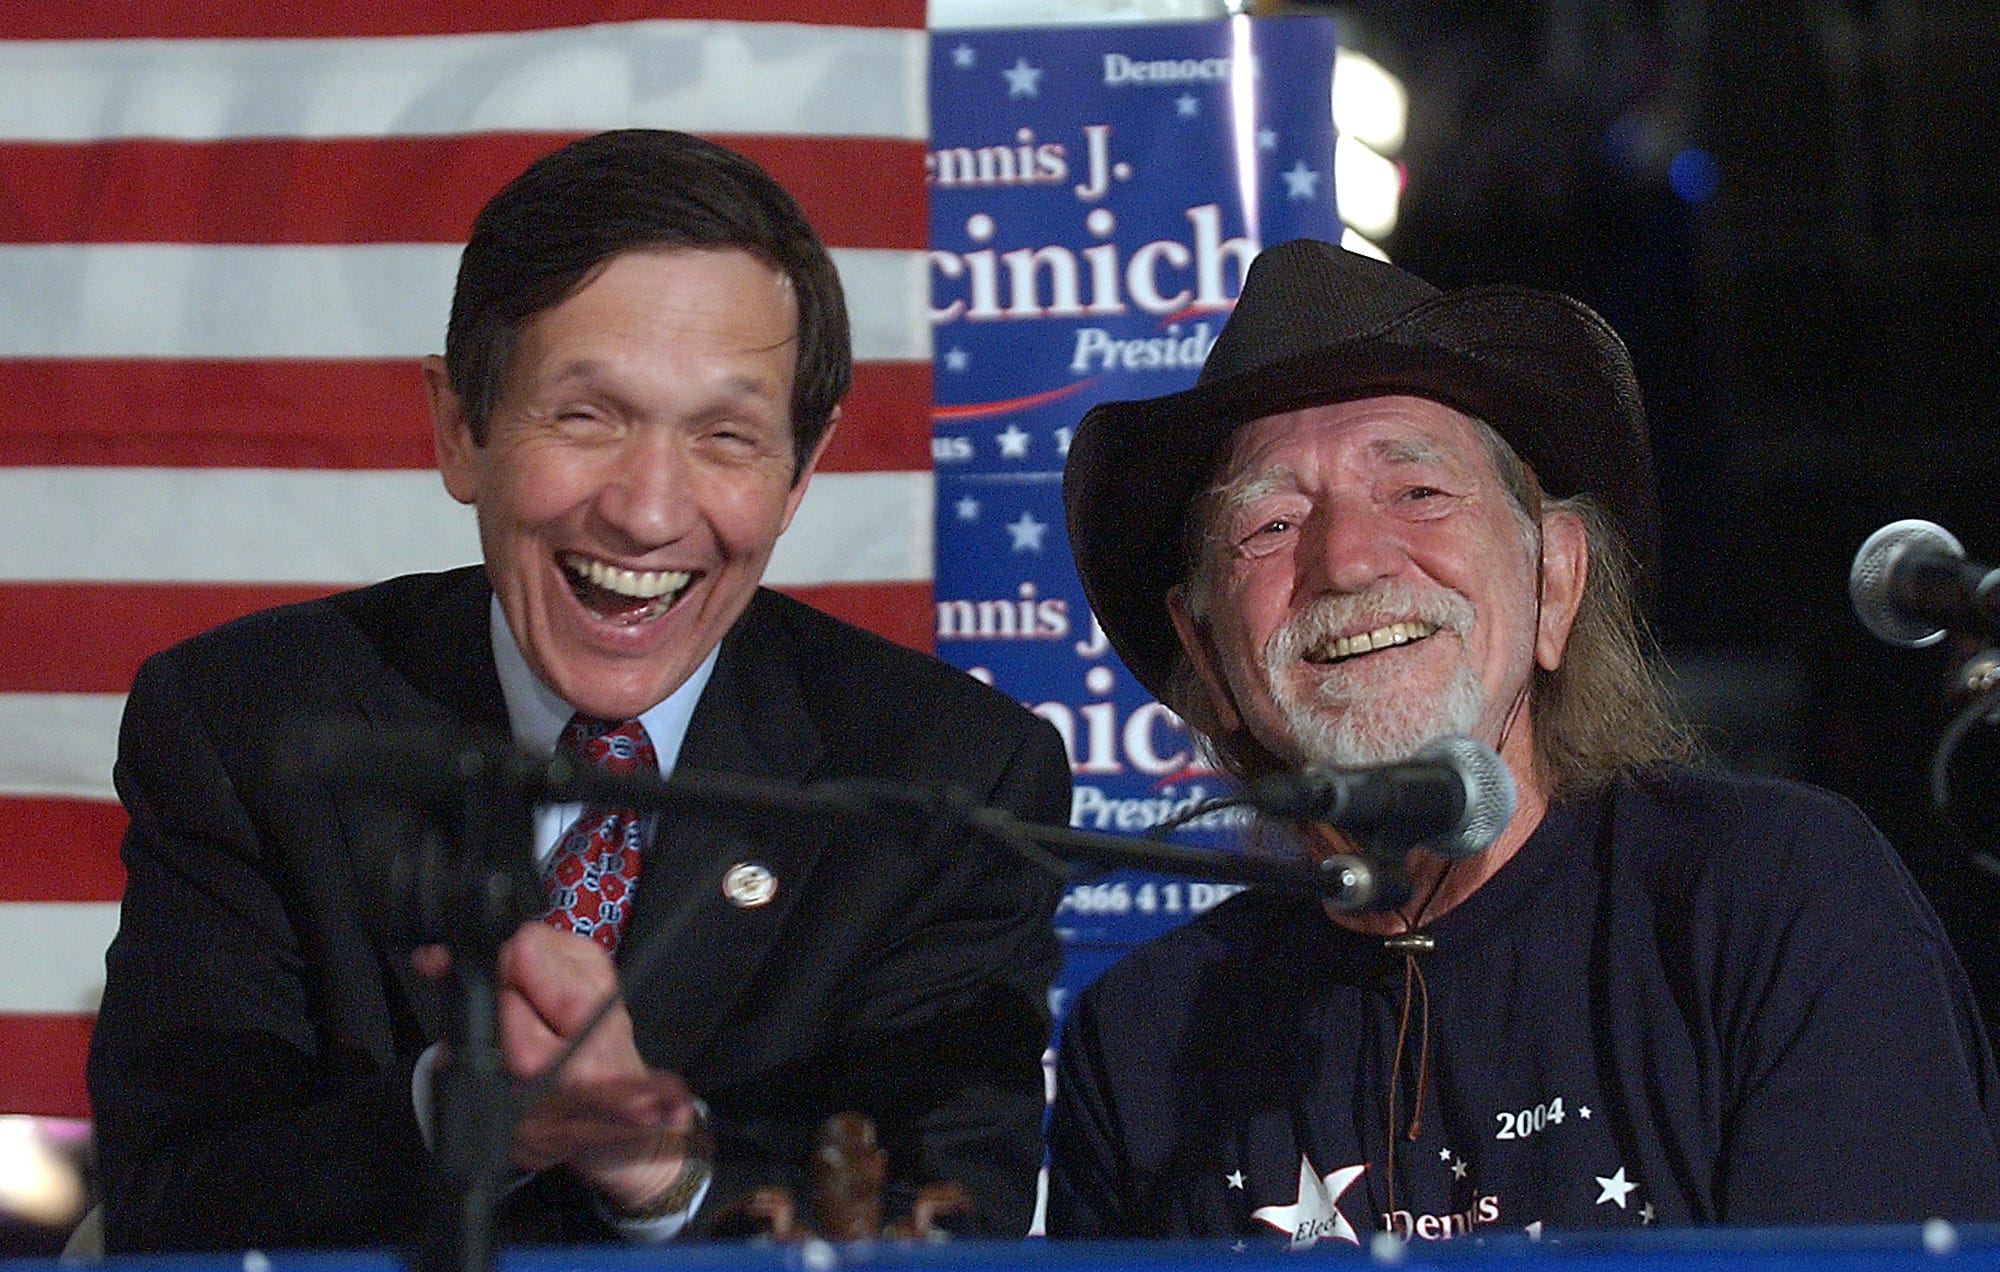 Democratic presidential candidate Dennis Kucinich, left, laughs at a comment made by Willie Nelson during a press conference at the Austin Music Hall in Austin, Texas, on Saturday, January 3, 2004.